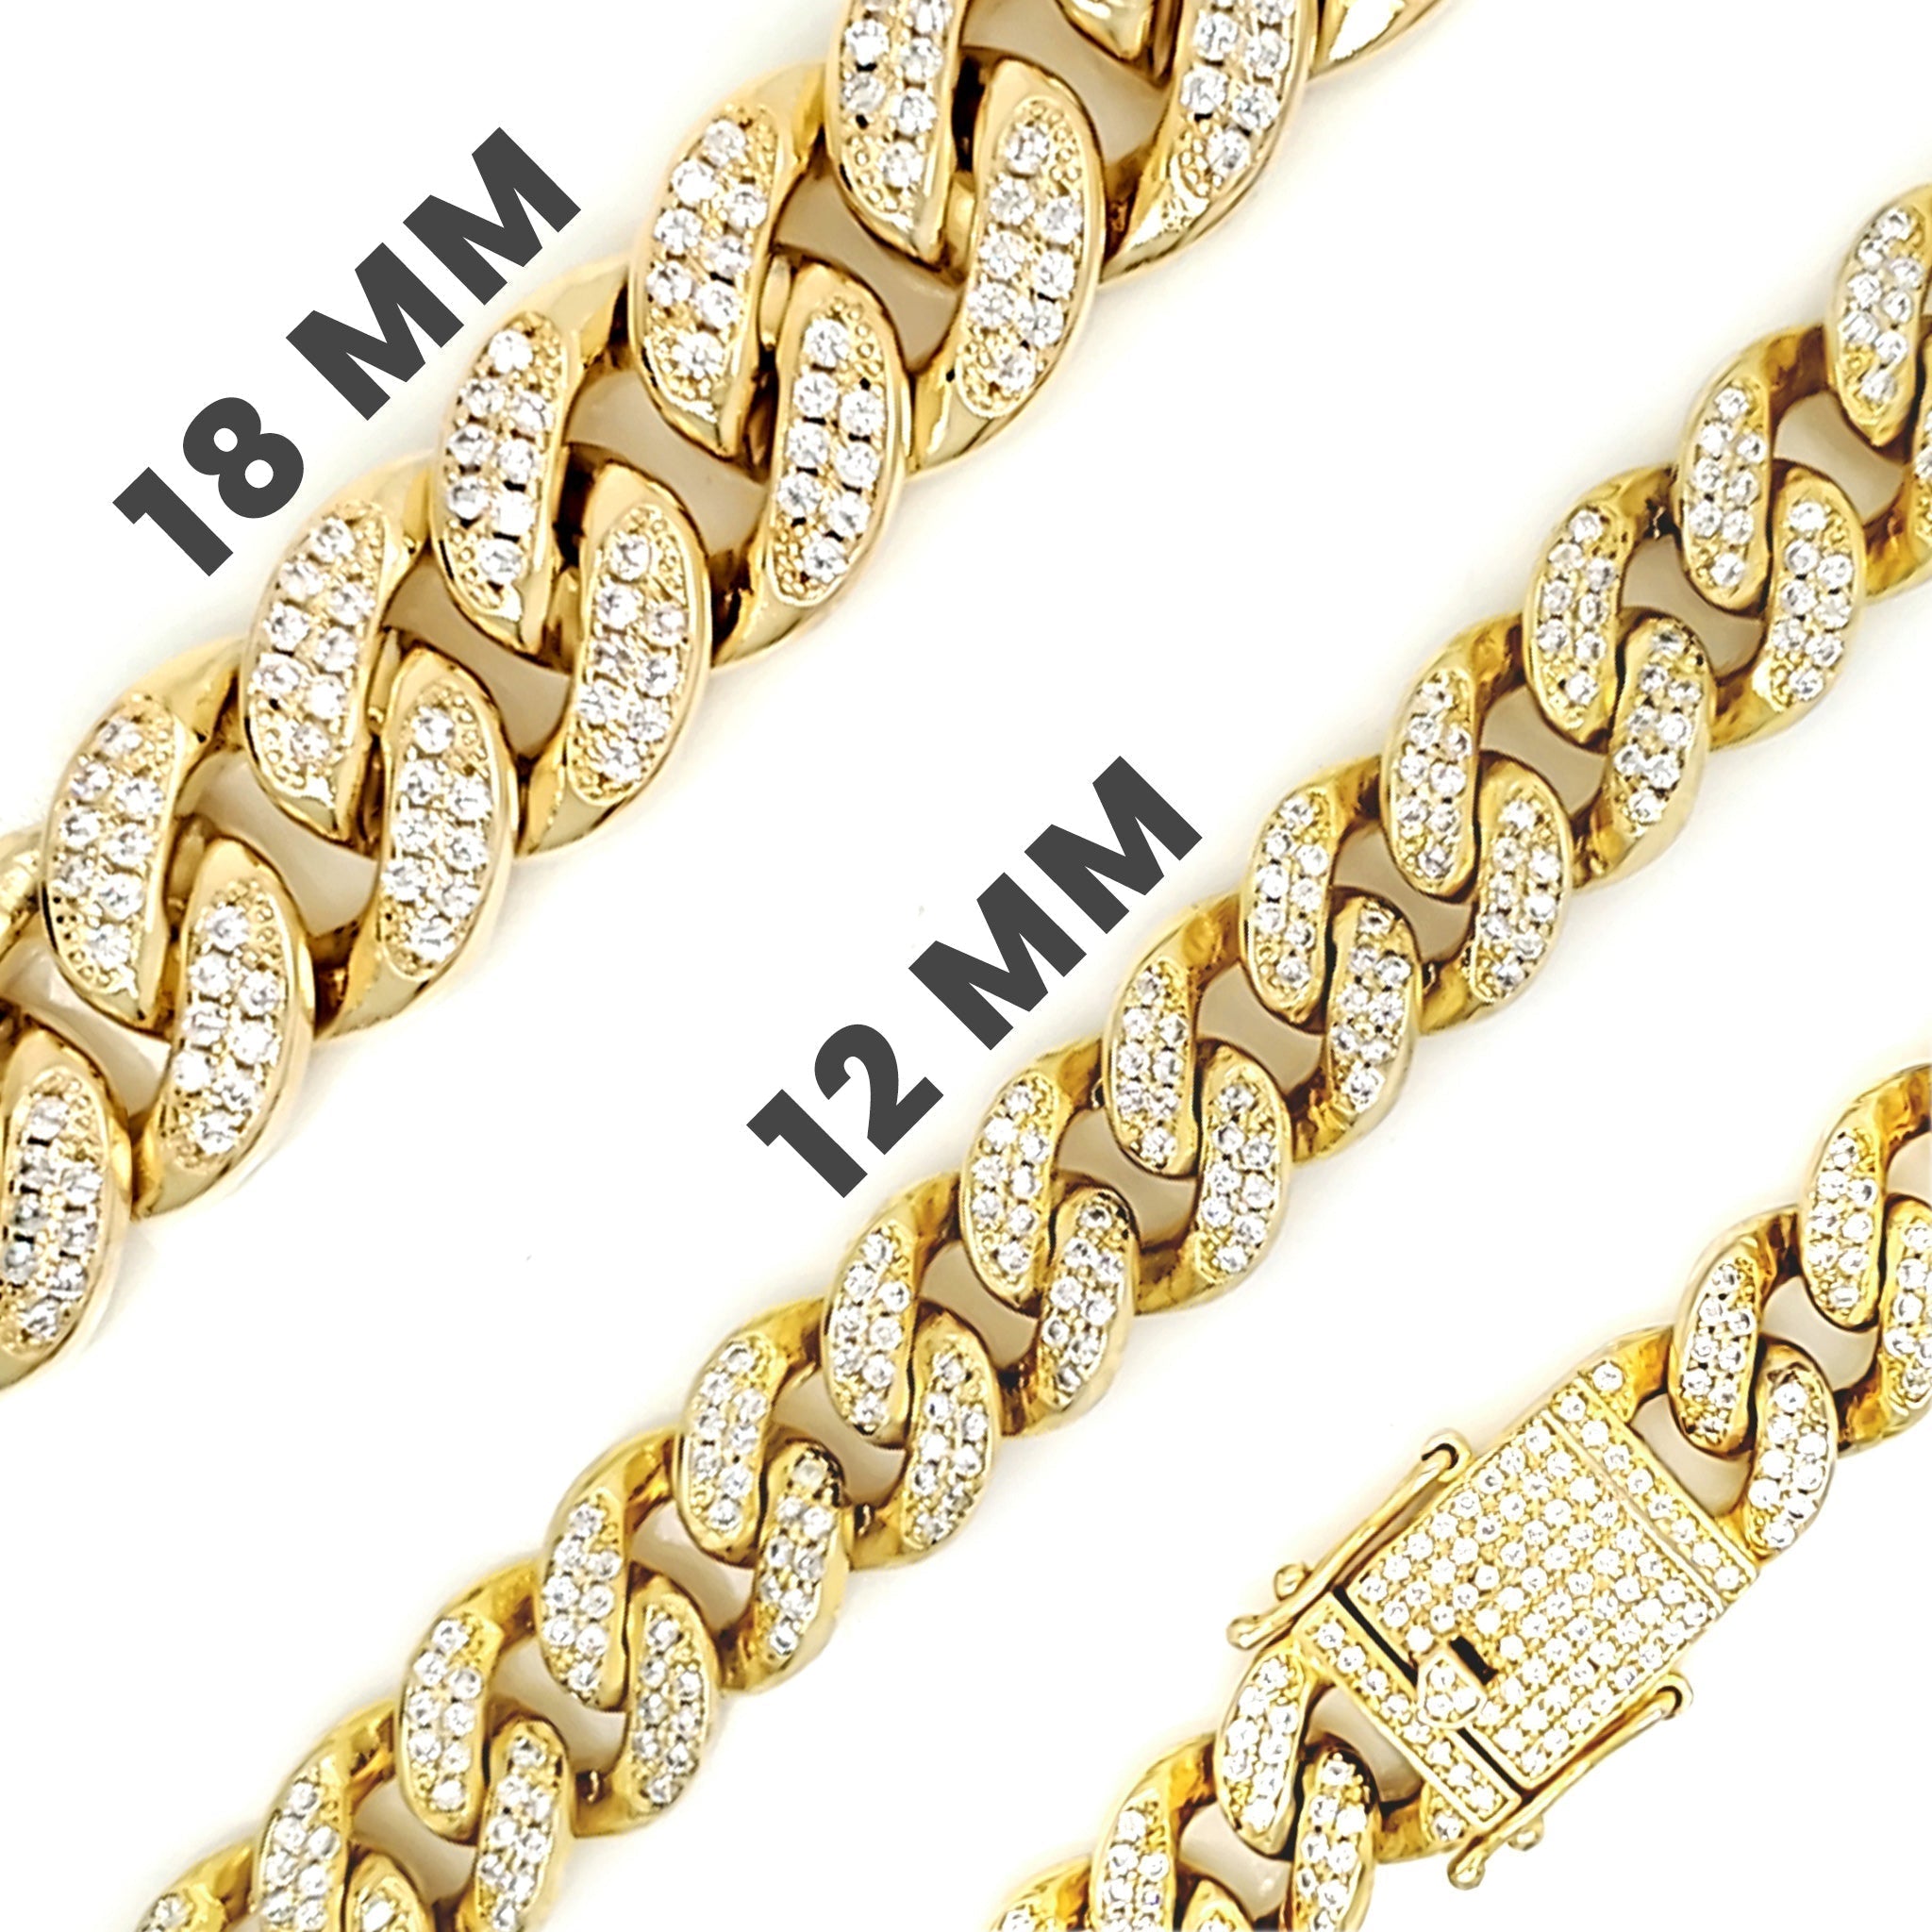 18K Gold Plated Miami Cuban Chain with CZ Stones - Durable and Versatile Bracelet Bijou Her